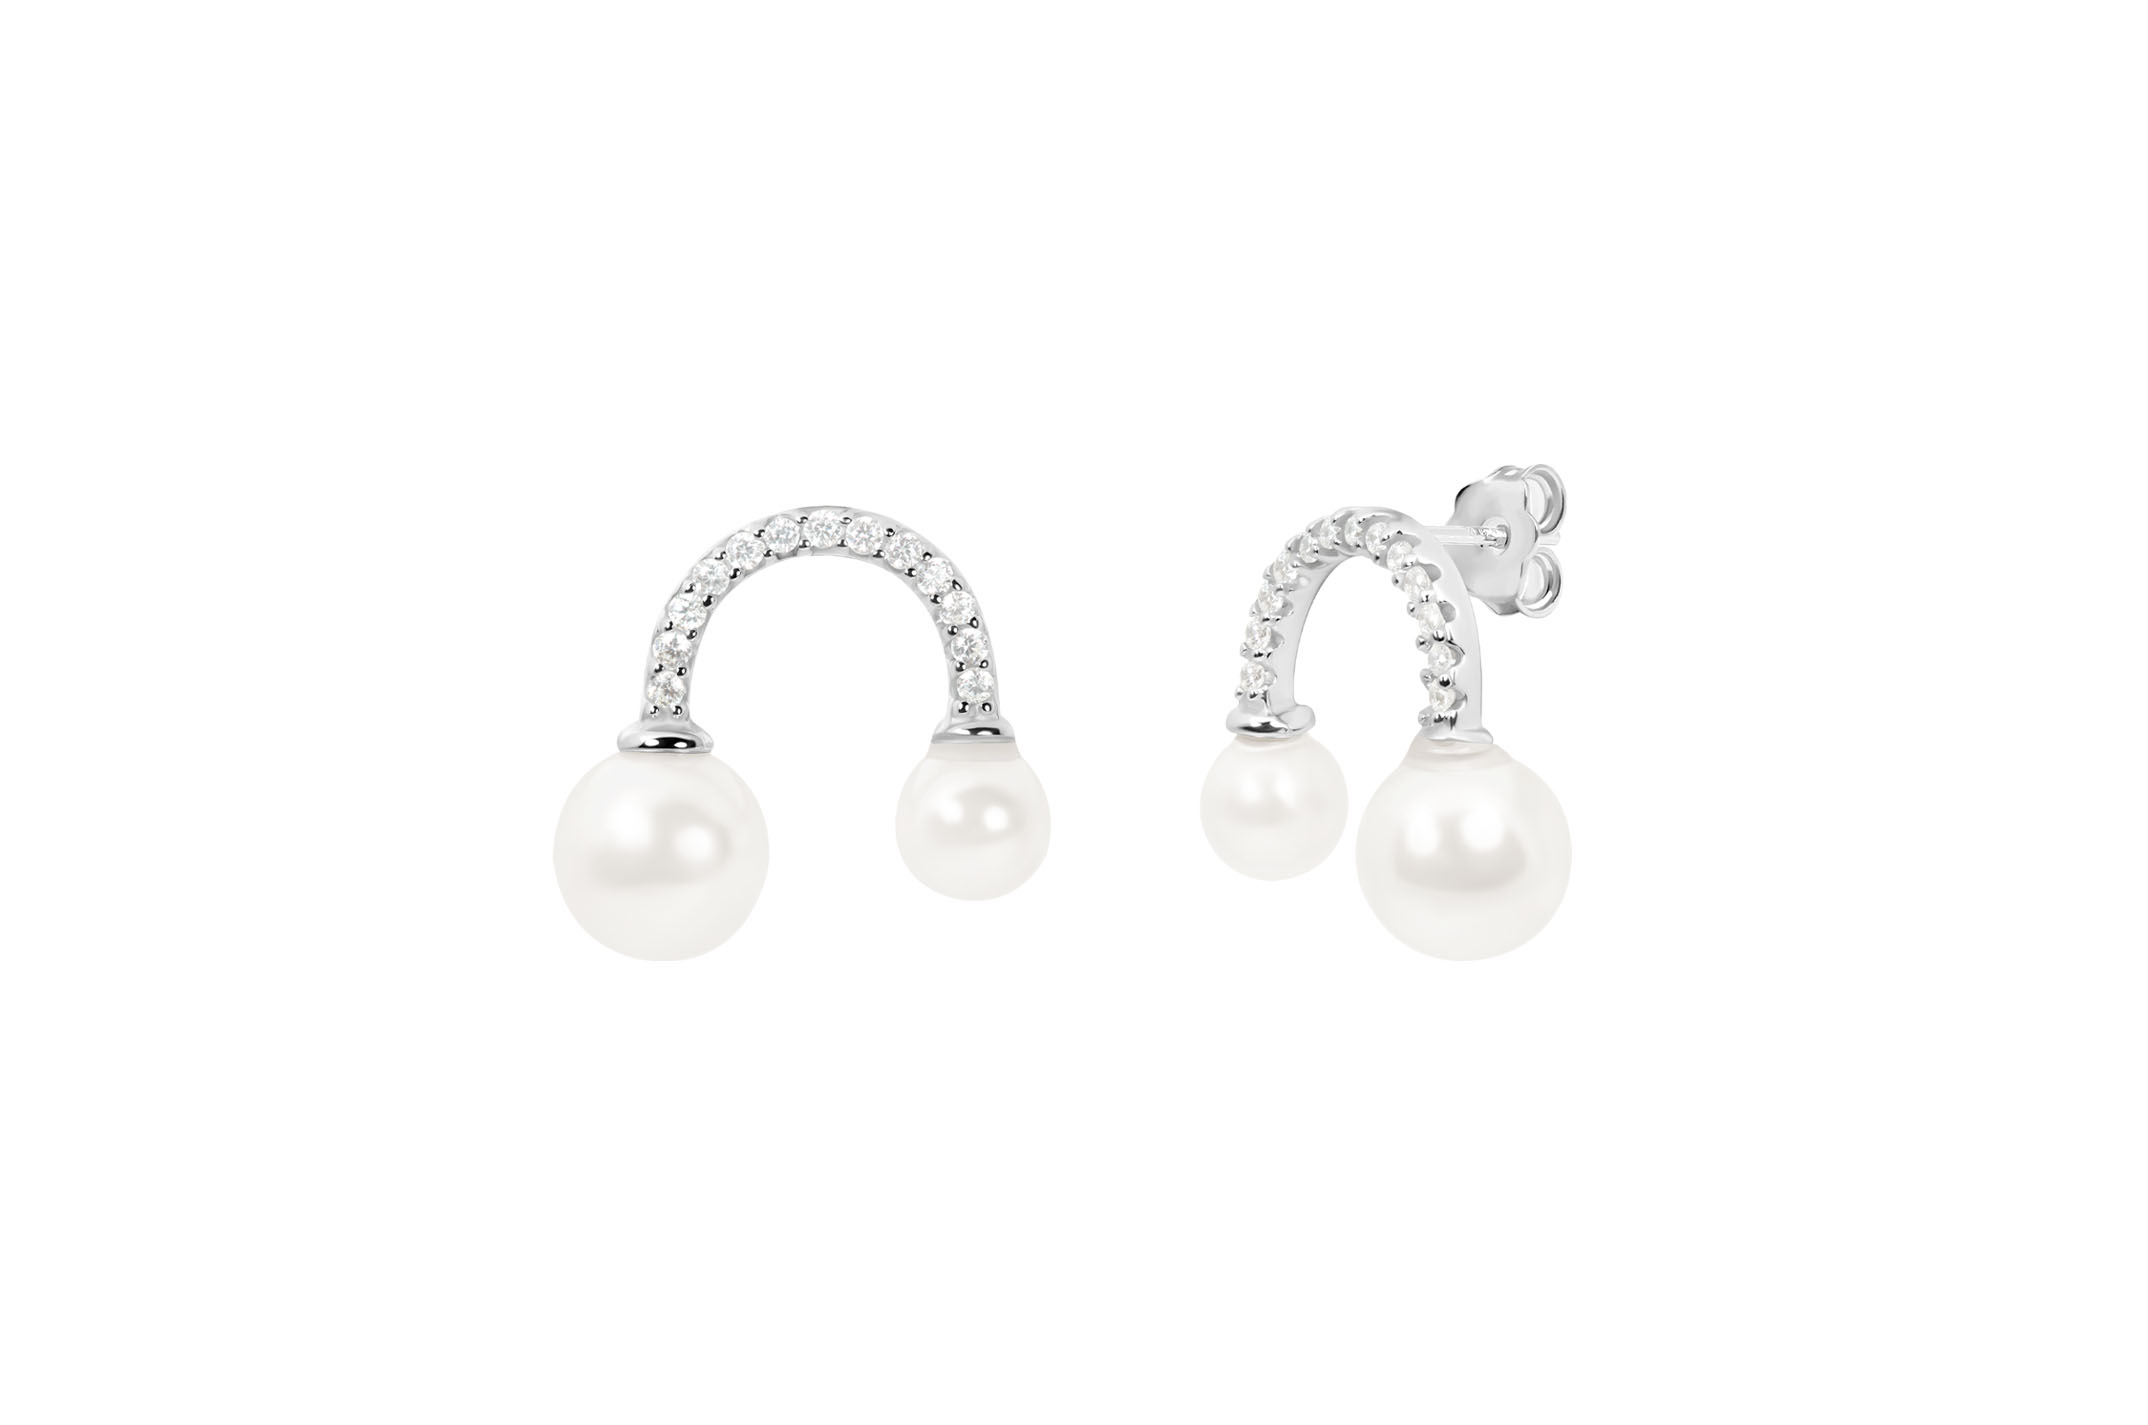 Jewel: earrings;Material: silver 925;Weight: 2.2 gr;Stone: pearls & zirconia;Color: white;Size: 1.2 cm